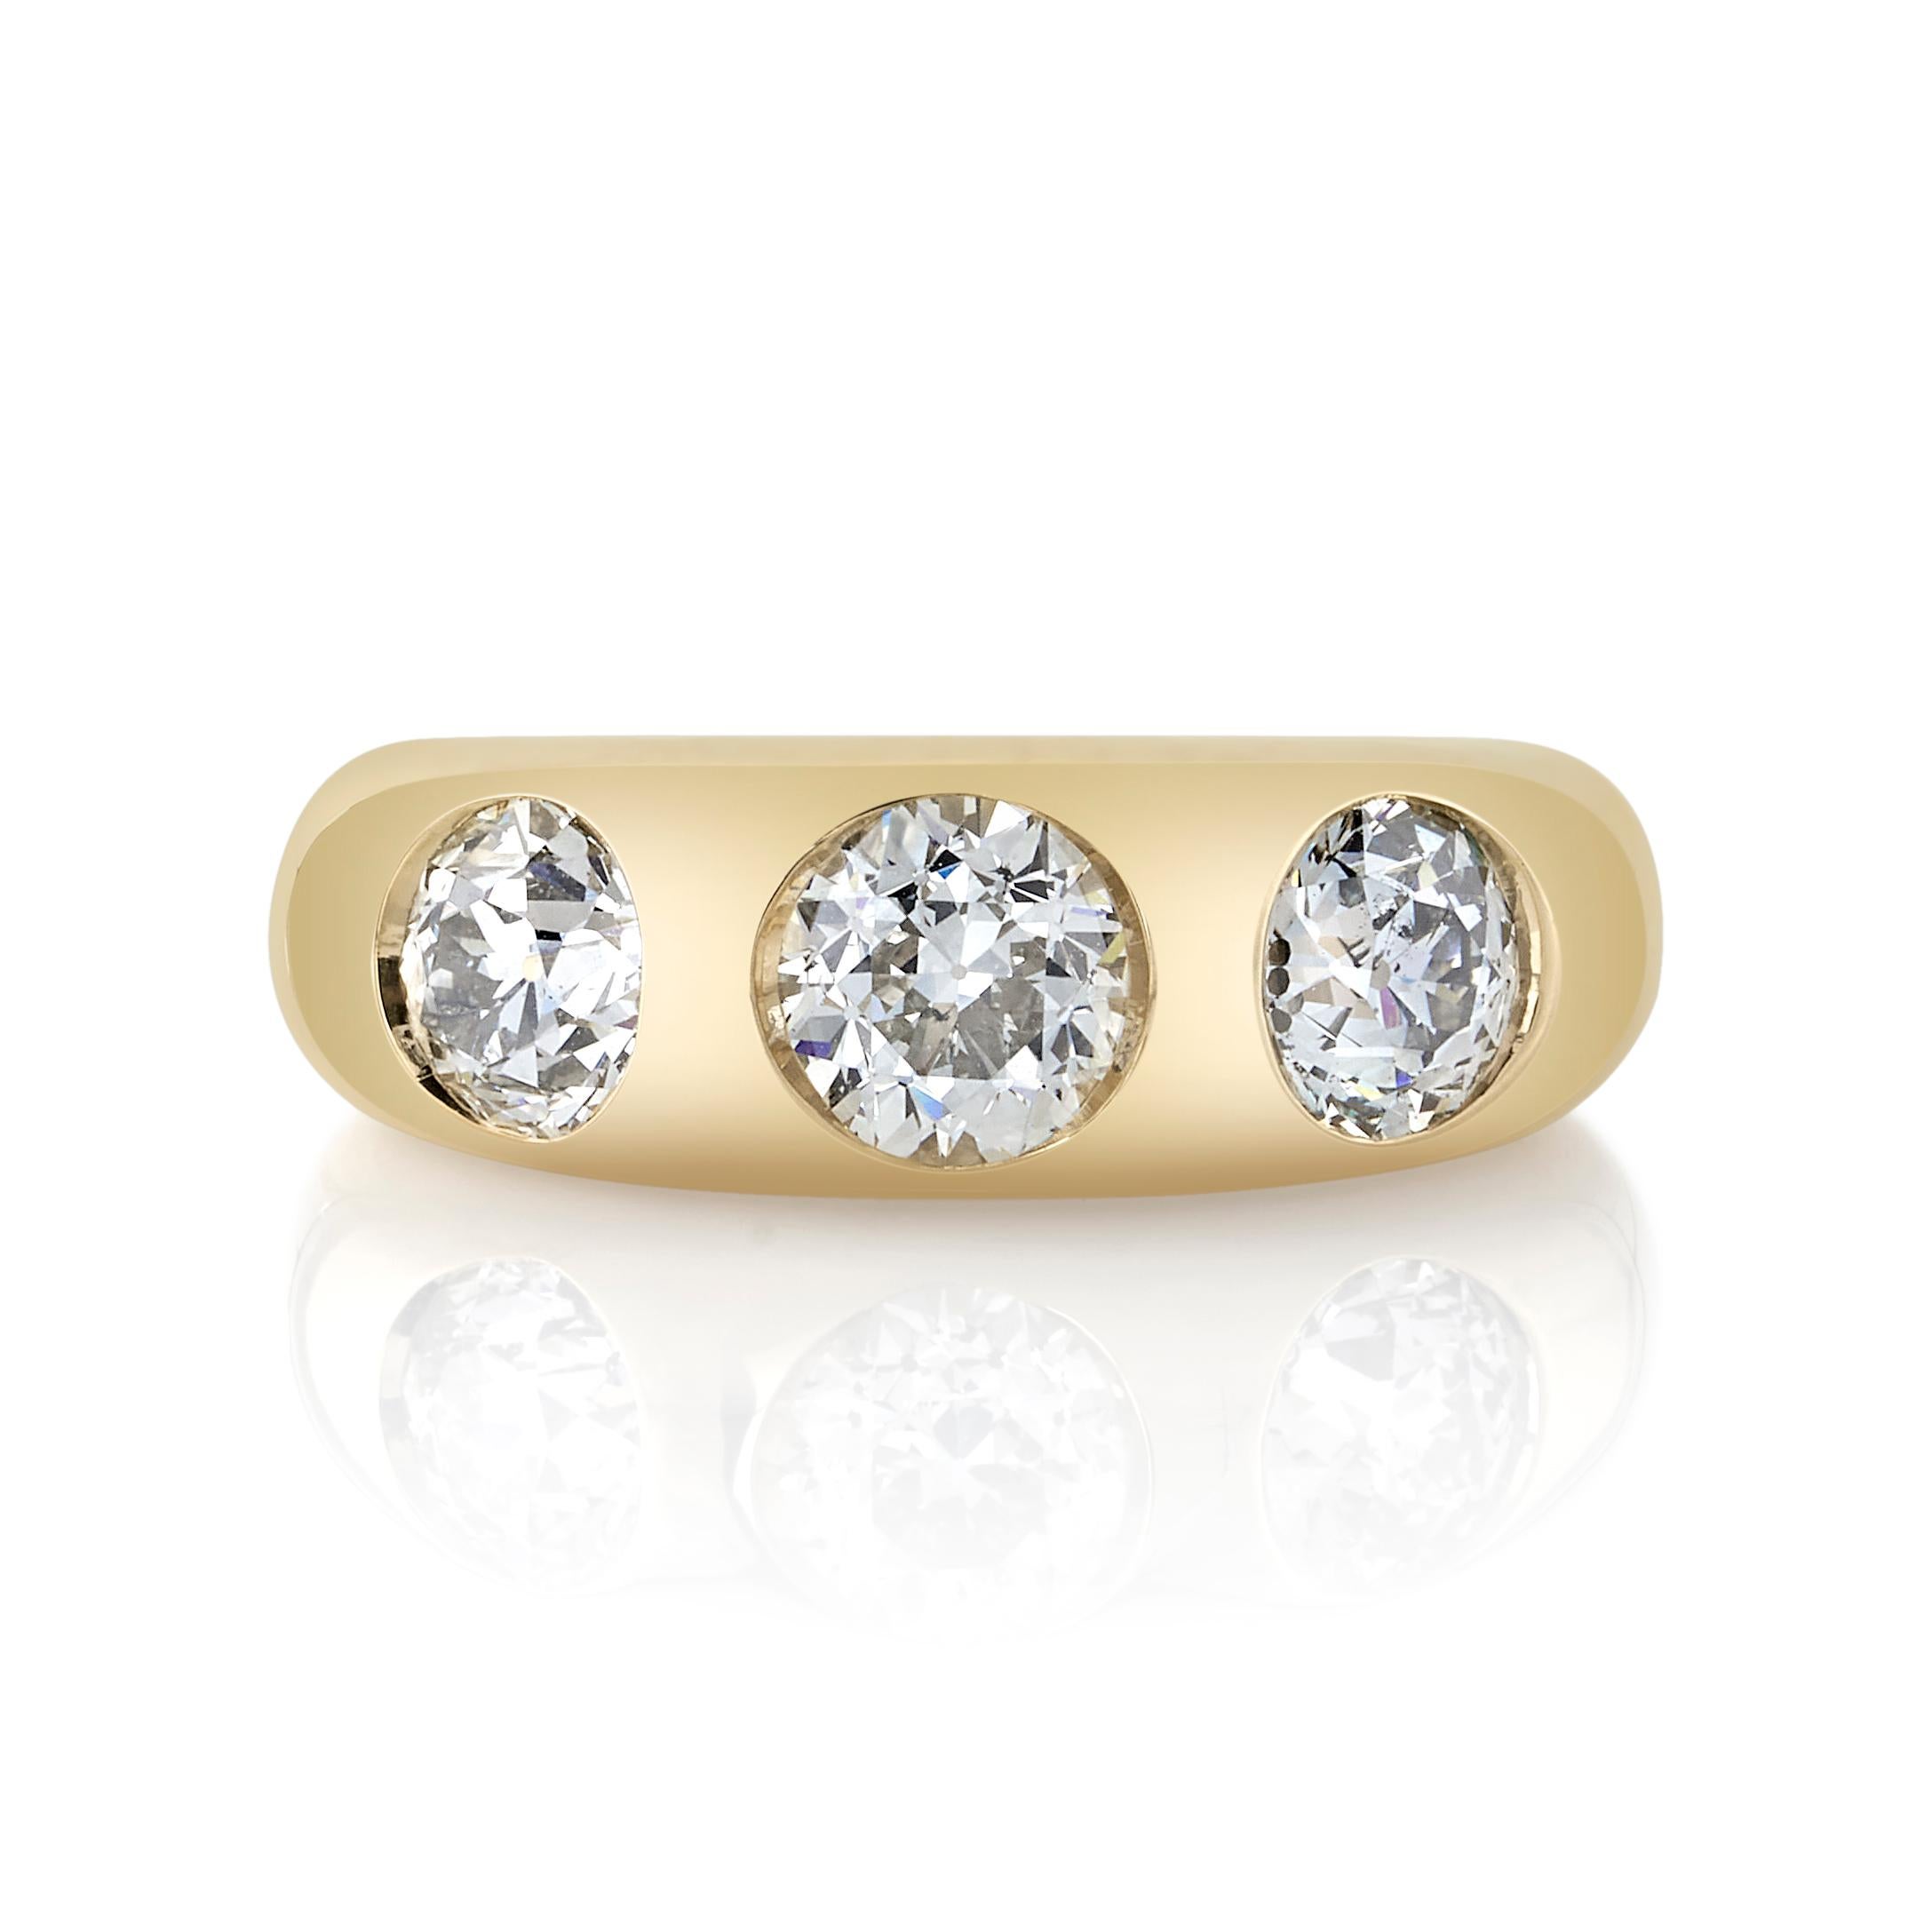 0.76ct K/SI2 GIA certified old European cut diamond with 1.27ctw old European cut accent diamonds set in a handcrafted 18K yellow gold mounting.

Ring is currently size 6. Please contact us about potential re-sizing.

Our jewelry is made locally in